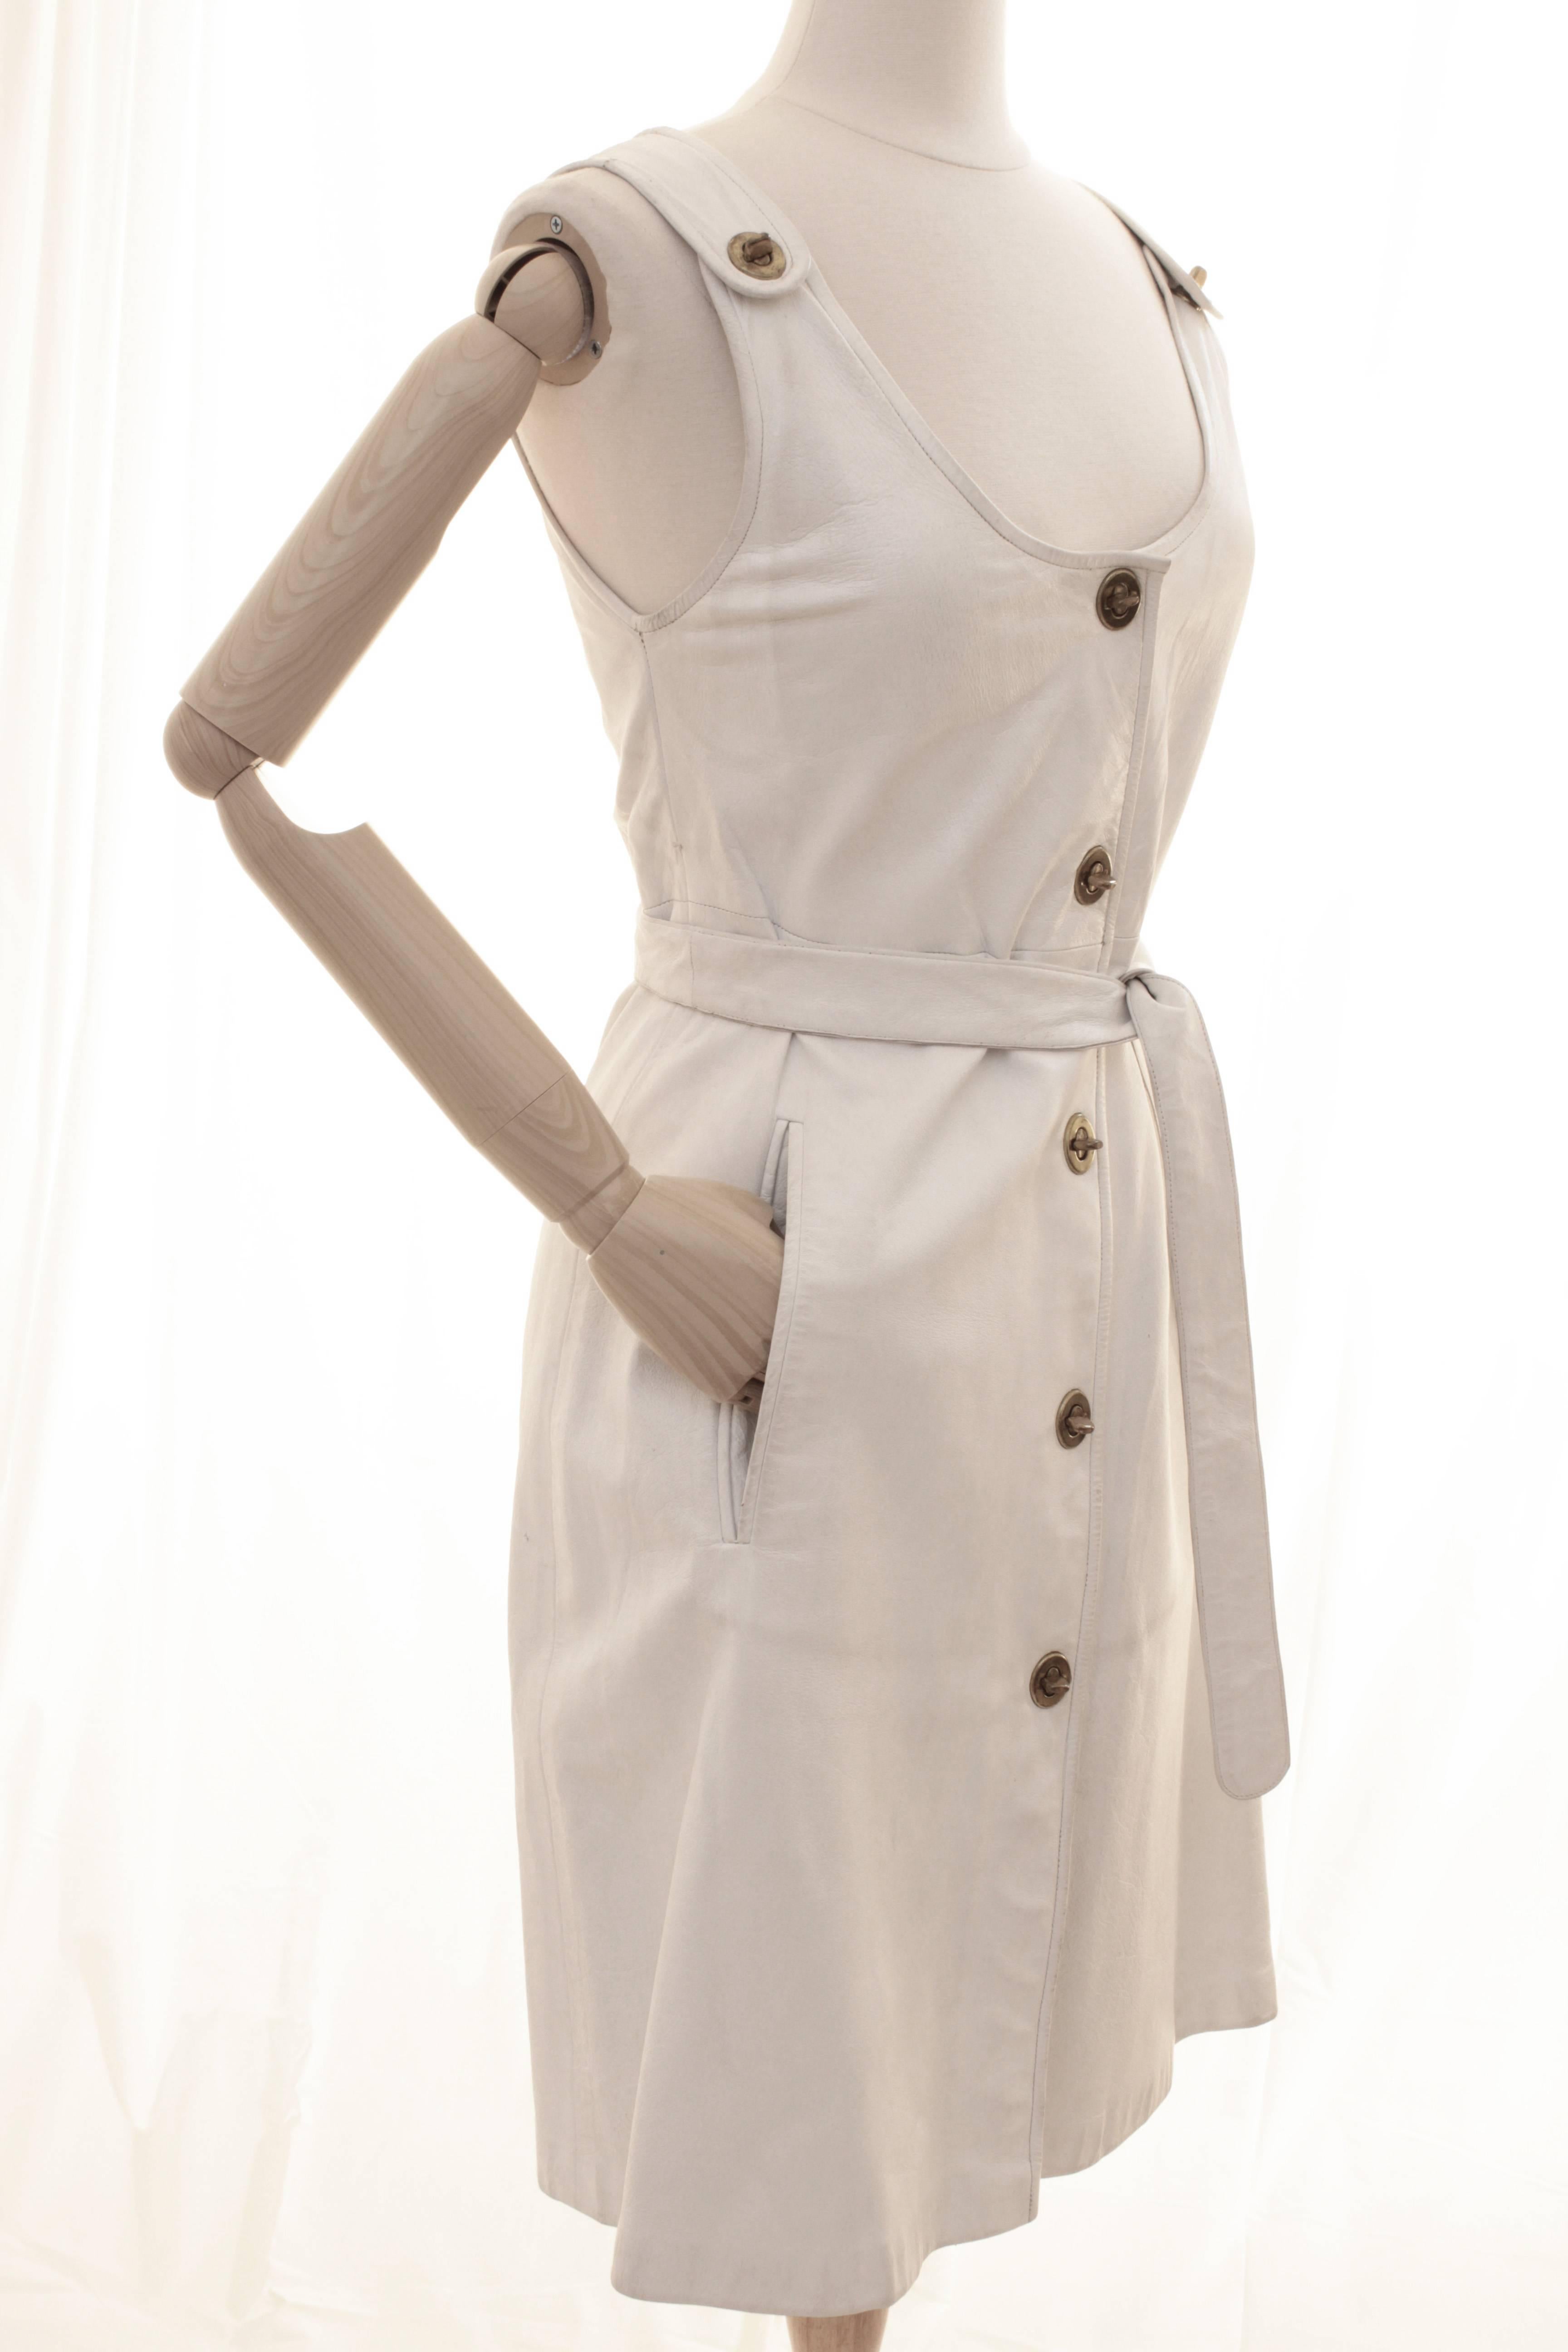 This incredibly rare ensemble was made by Bonnie Cashin during her time at Sills and includes a white leather dress with turn locks, a matching white leather belt and a pair of white leather gloves with brass turn locks.  Fully-lined, the dress has